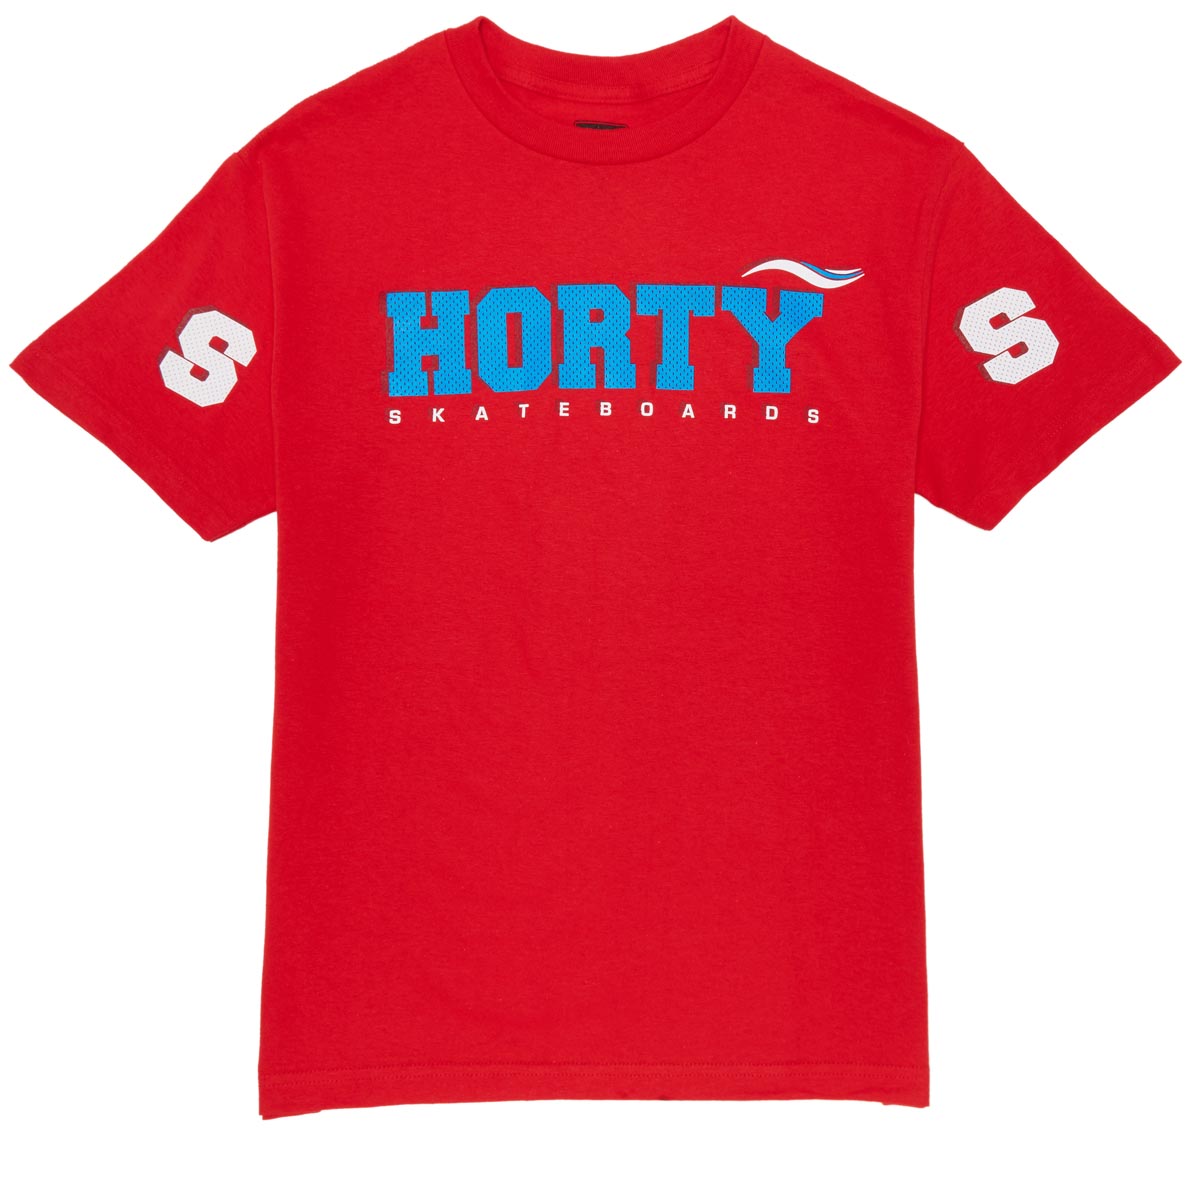 Shorty's S-horty-S Mesh T-Shirt - Red image 1